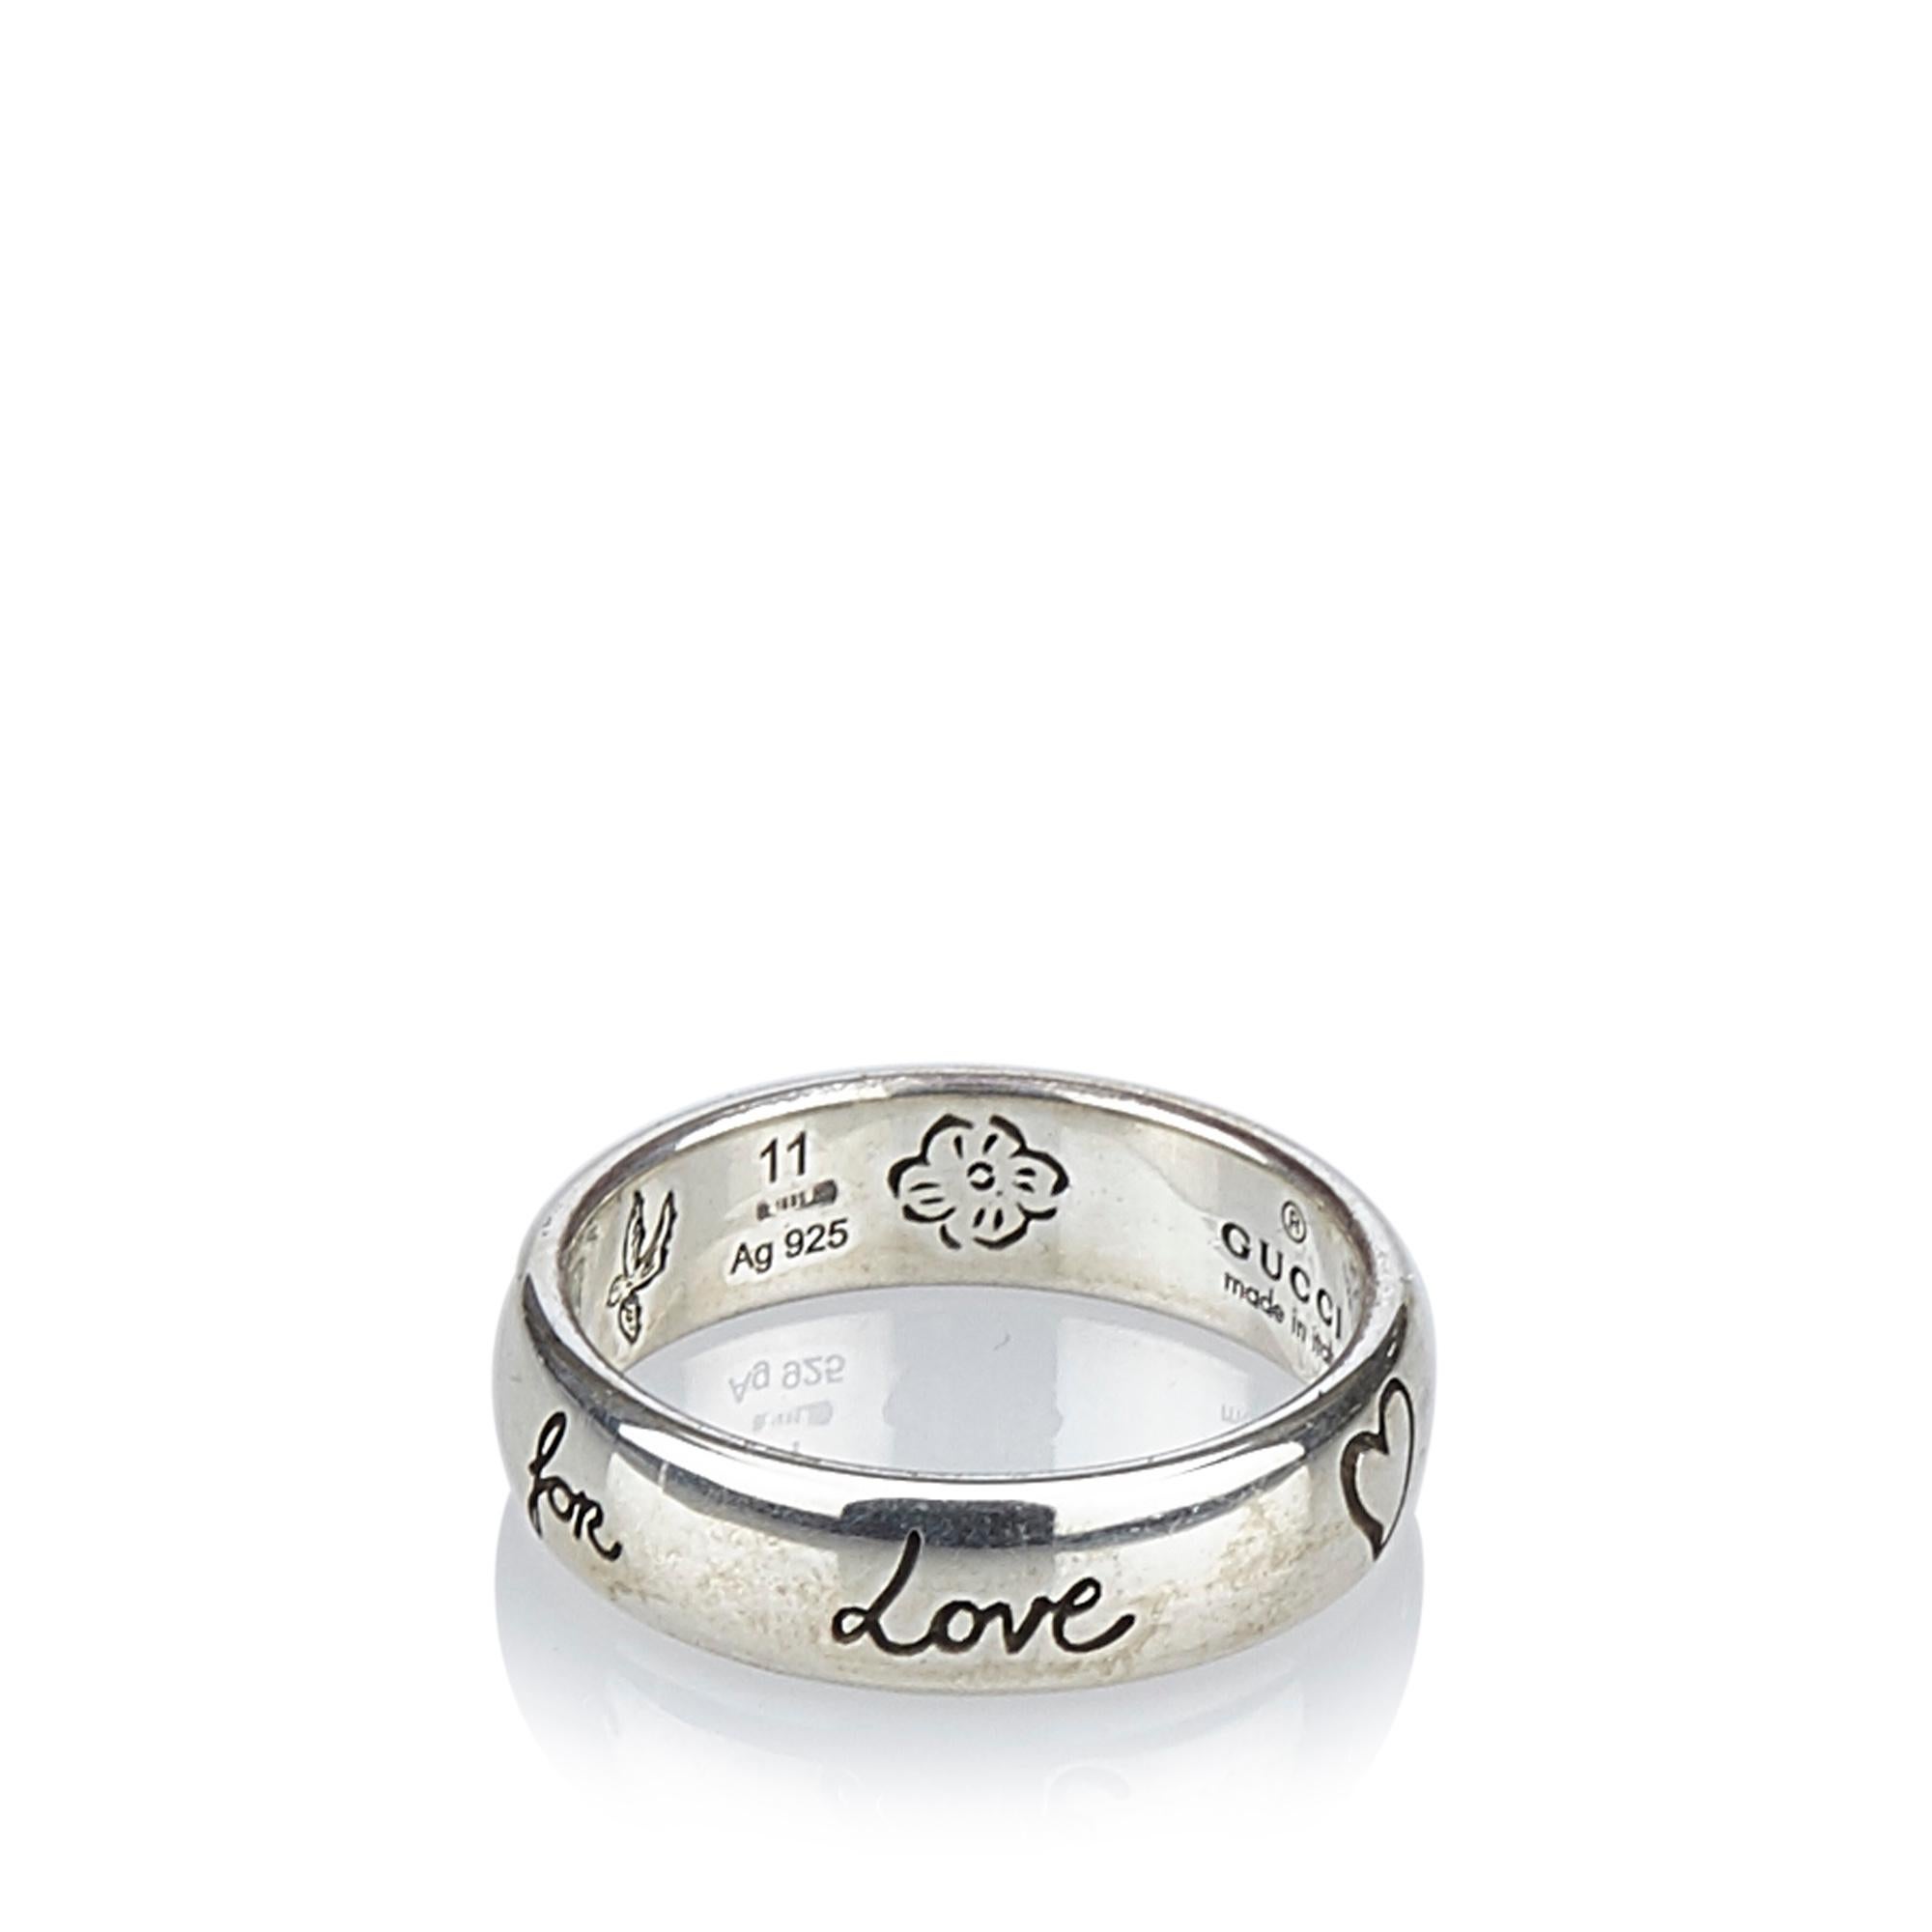 The Blind For Love Ring features a silver hardware. It carries as B condition rating.

Inclusions: 
Dust Bag
Box

Dimensions:
Length: 11.00 cm
Width: 0.50 cm
Ring Size: 52 cm

Material: Metal x Silver
Country of Origin: Italy

Order Processing Time: